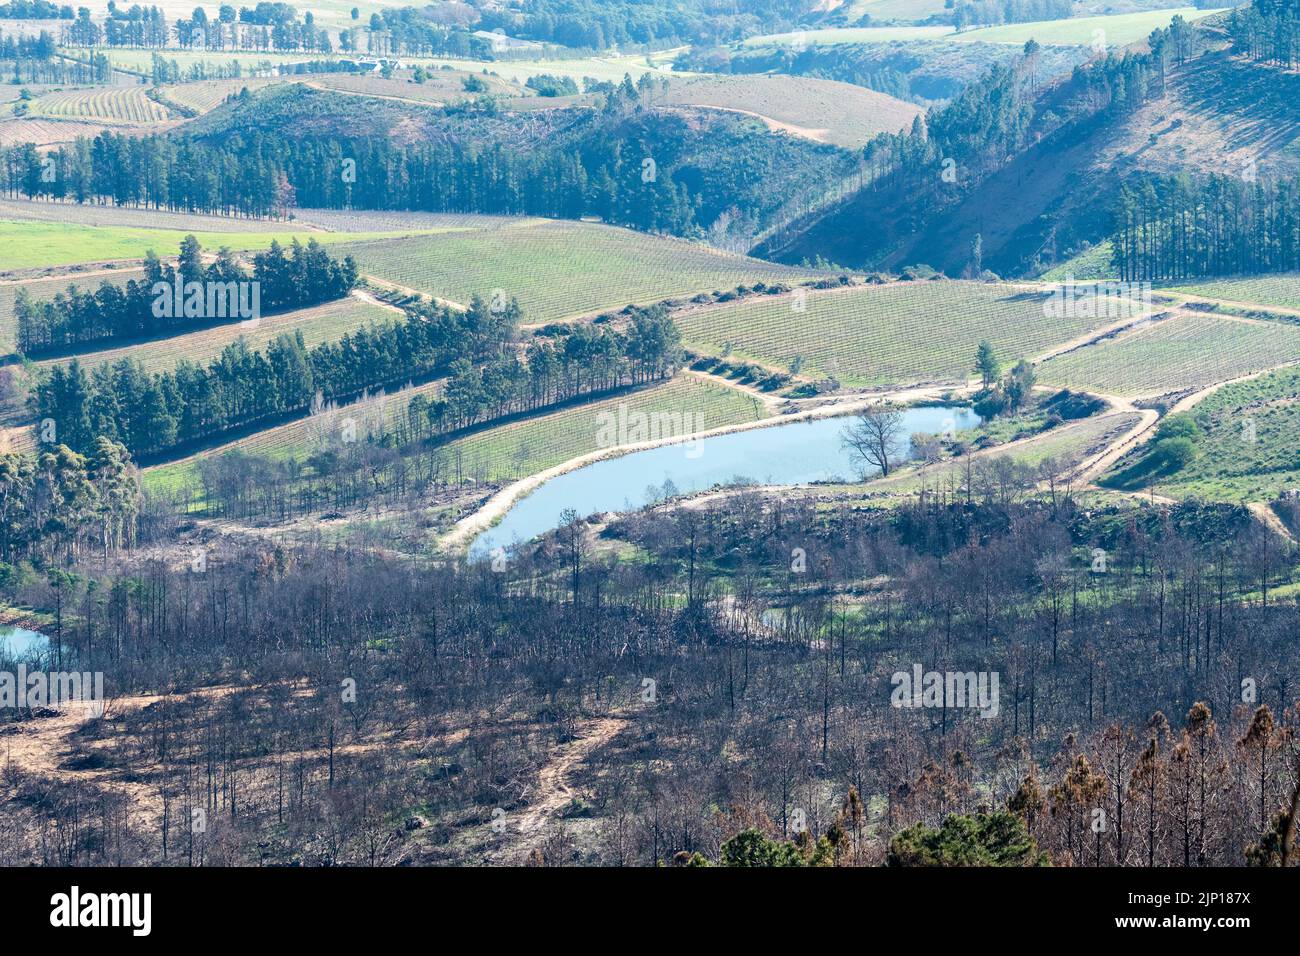 rural landscape of countryside overlooking partly burned trees on a mountainside with a farm dam and agricultural region in Western Cape, South Africa Stock Photo